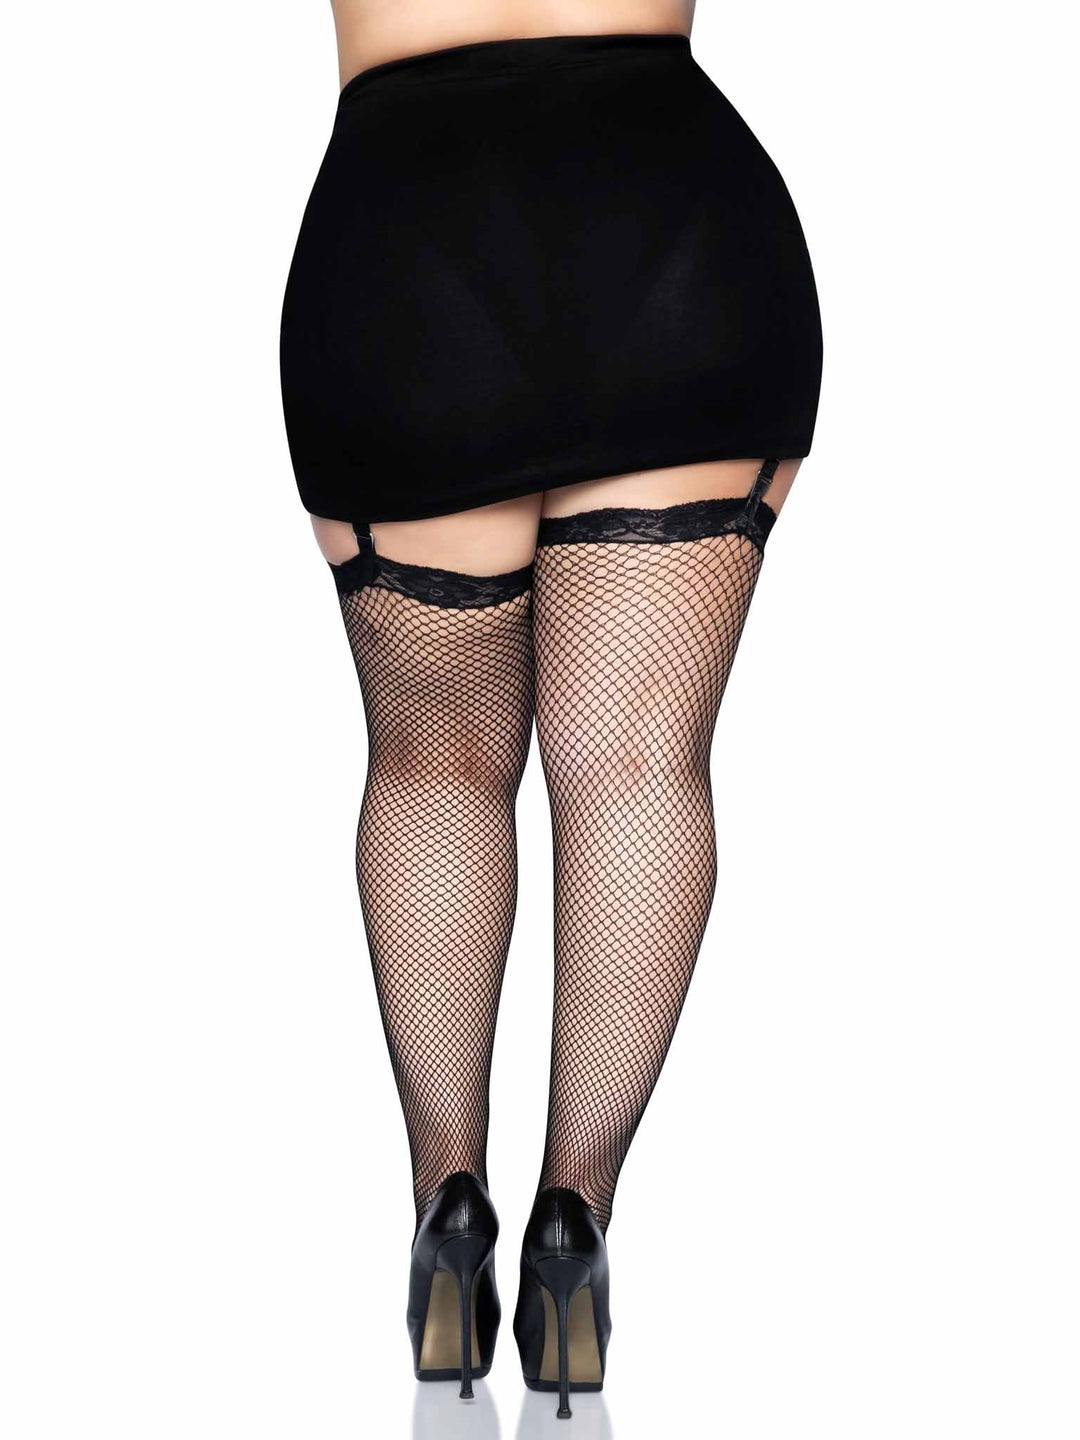 Classic Fishnet Plus Stocking with Lace Trim